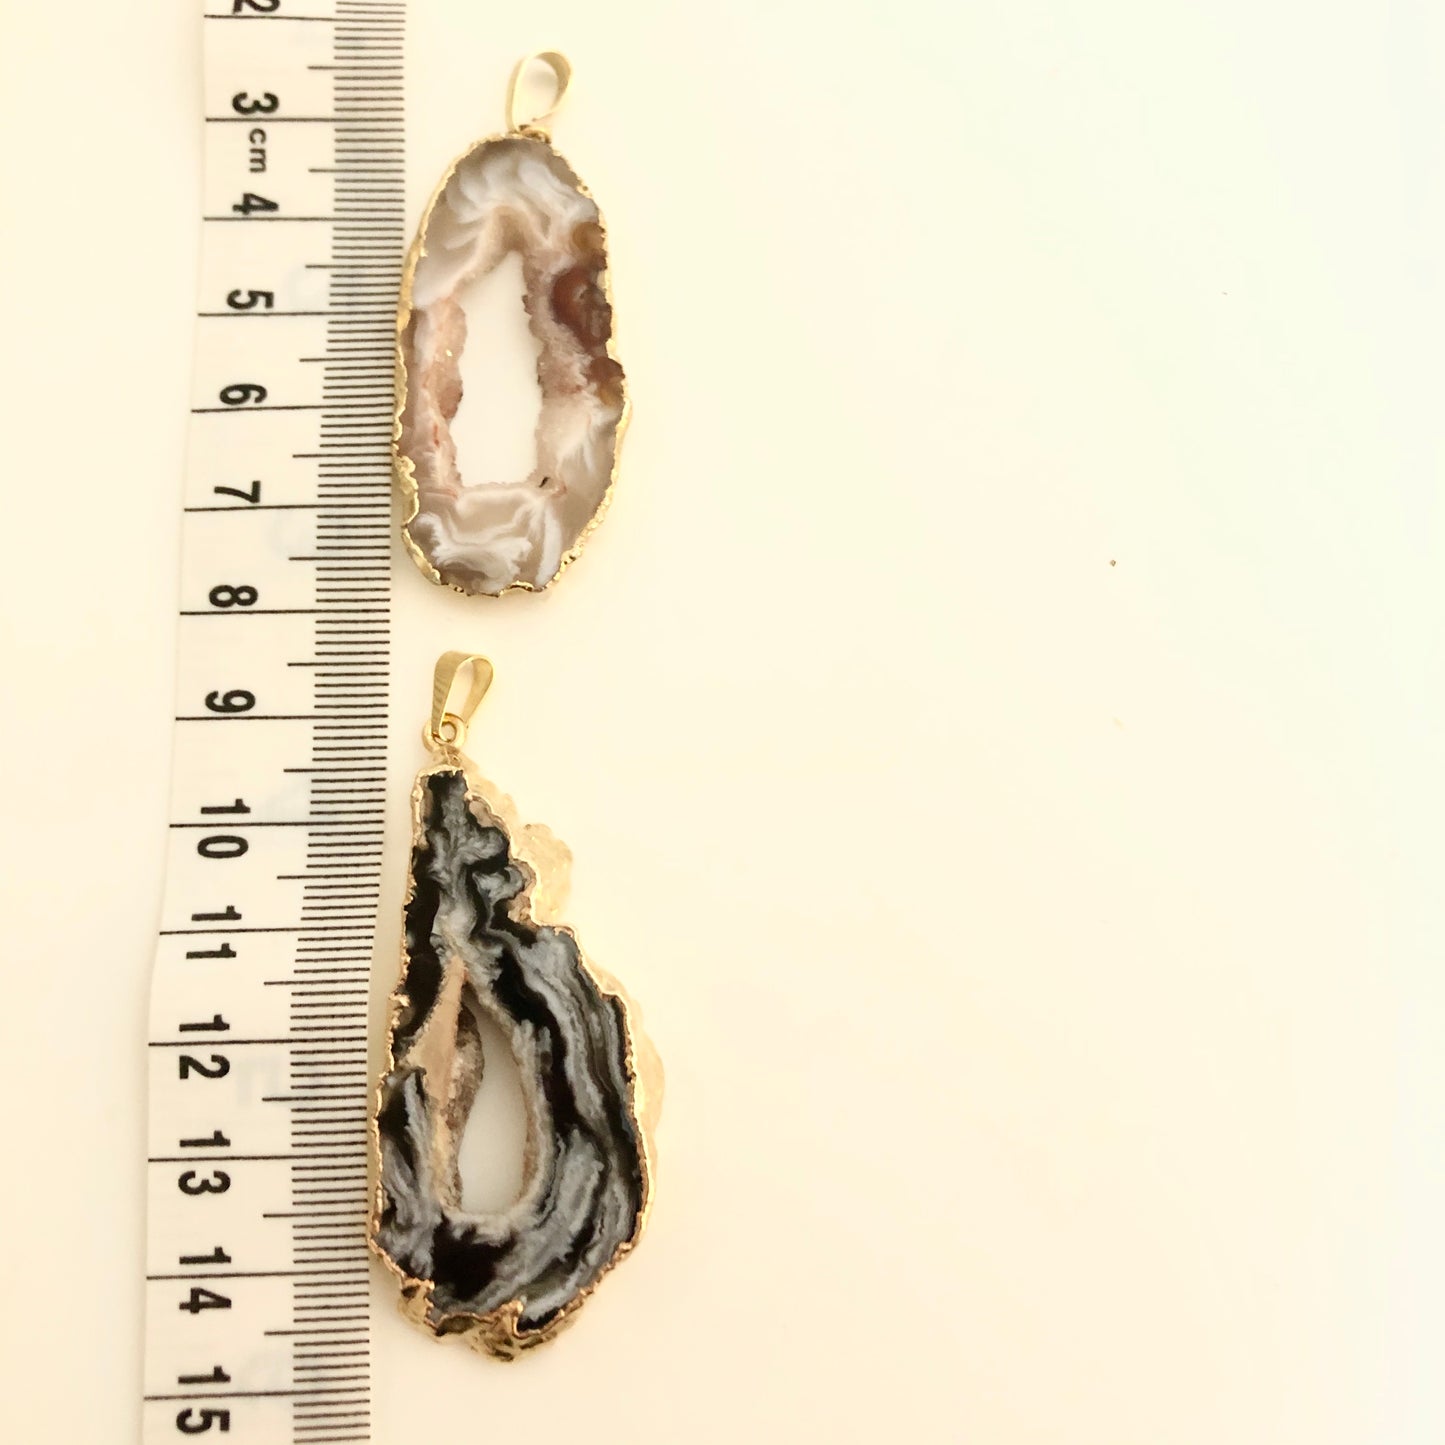 Two Geode Sliced pendants with Gold plated edge